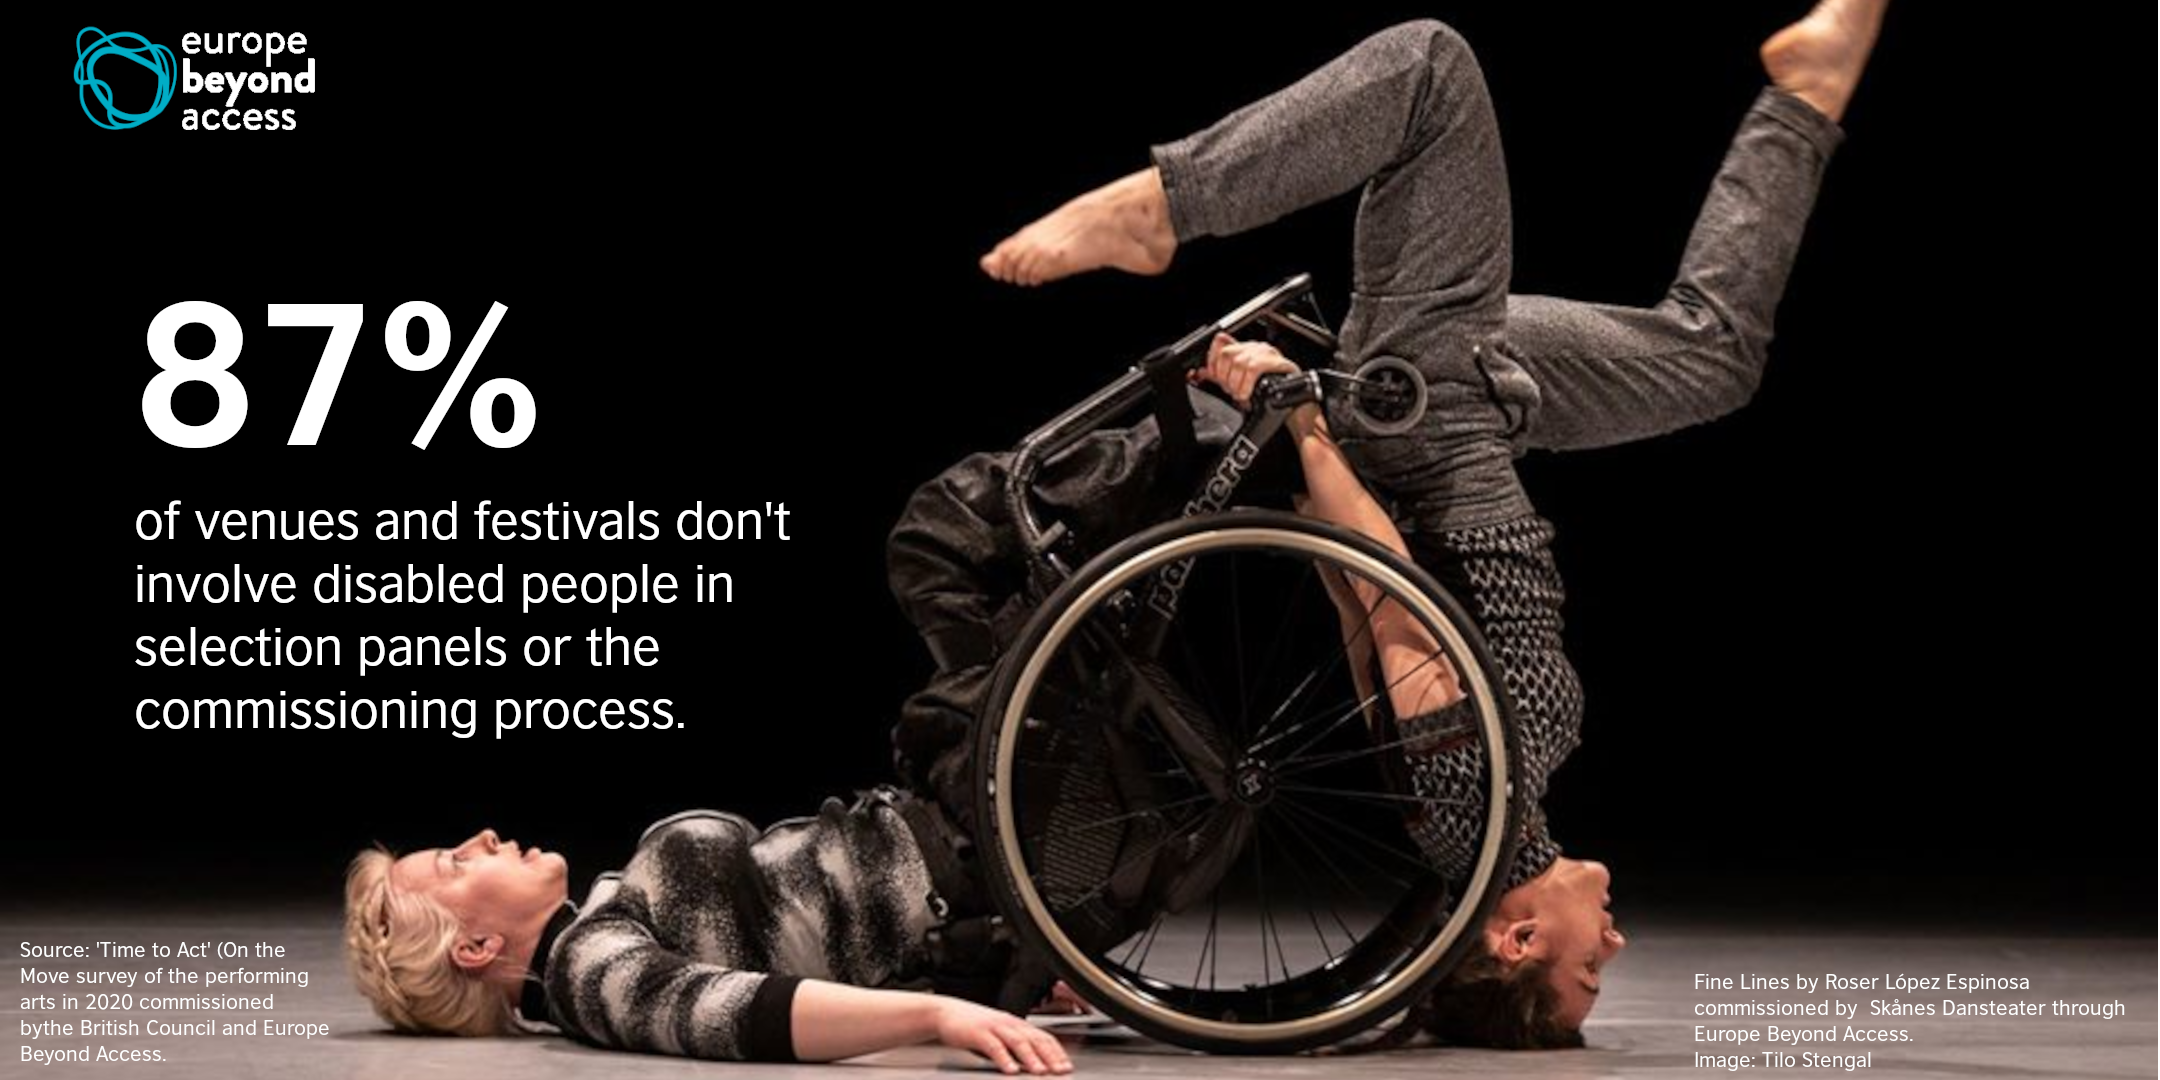 Two female dancers balance against each others backs, one is a wheelchair user.